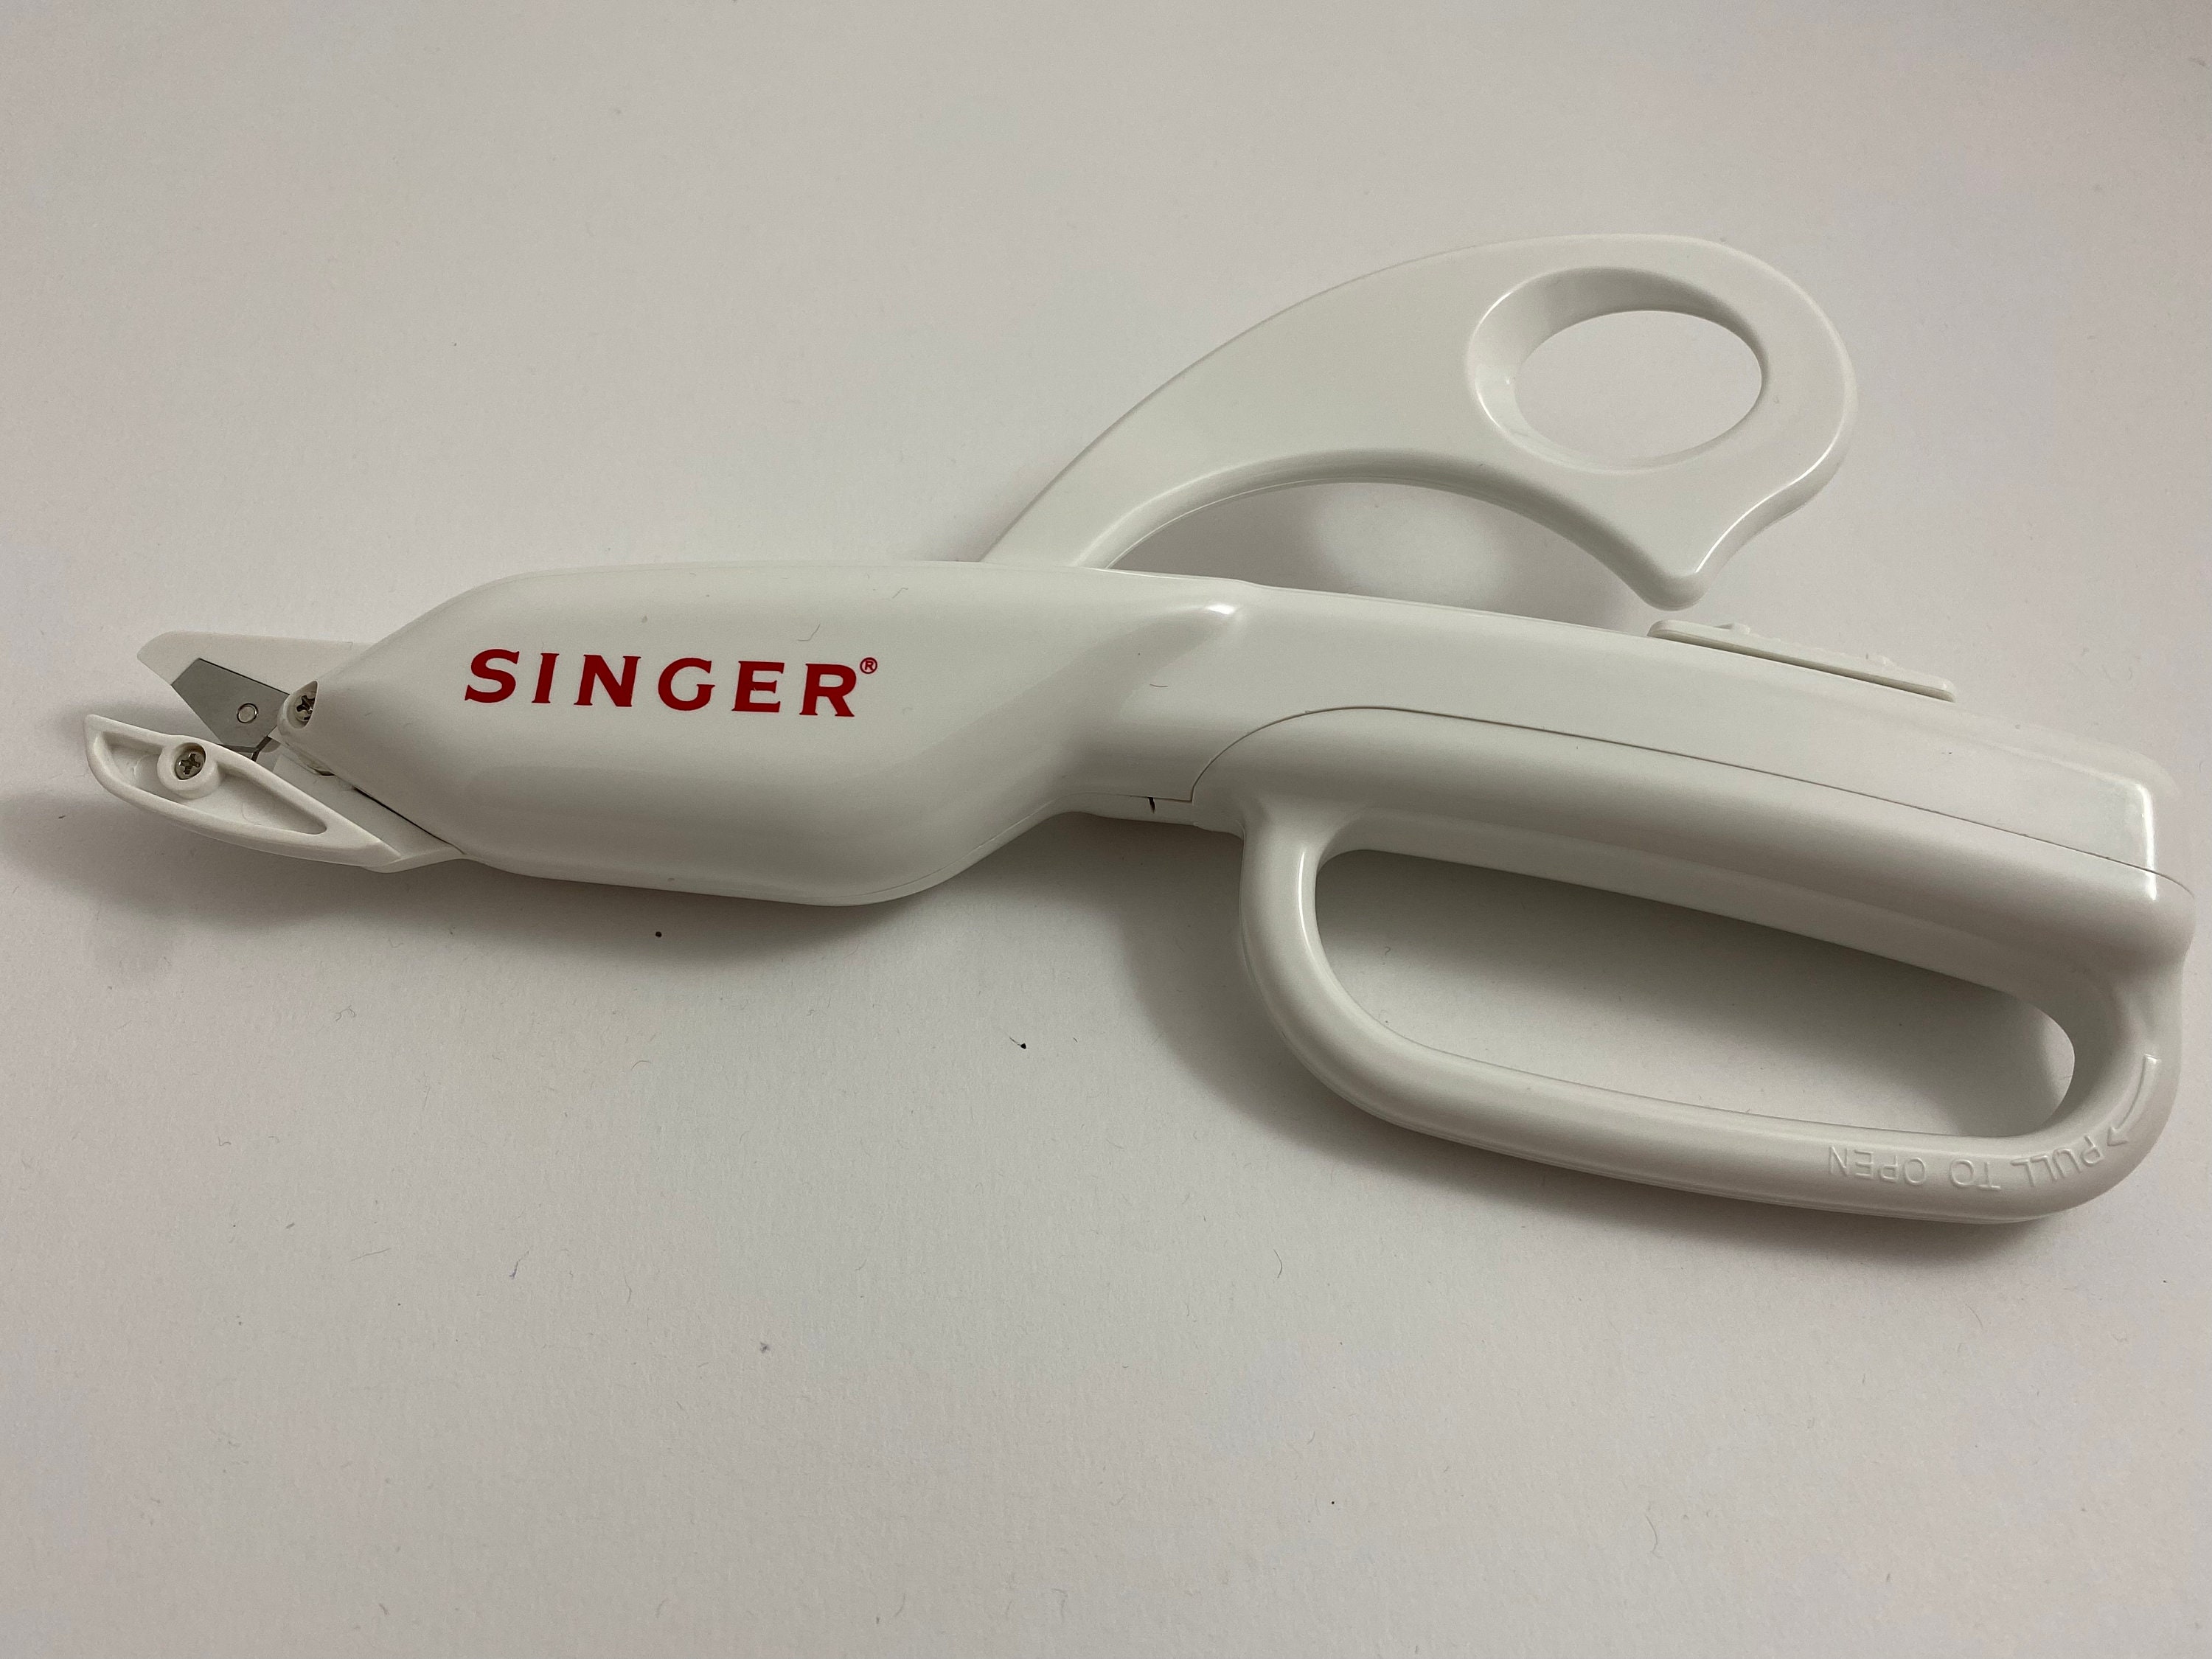 Singer Electric Scissors Cordless, White Battery Powered, It is